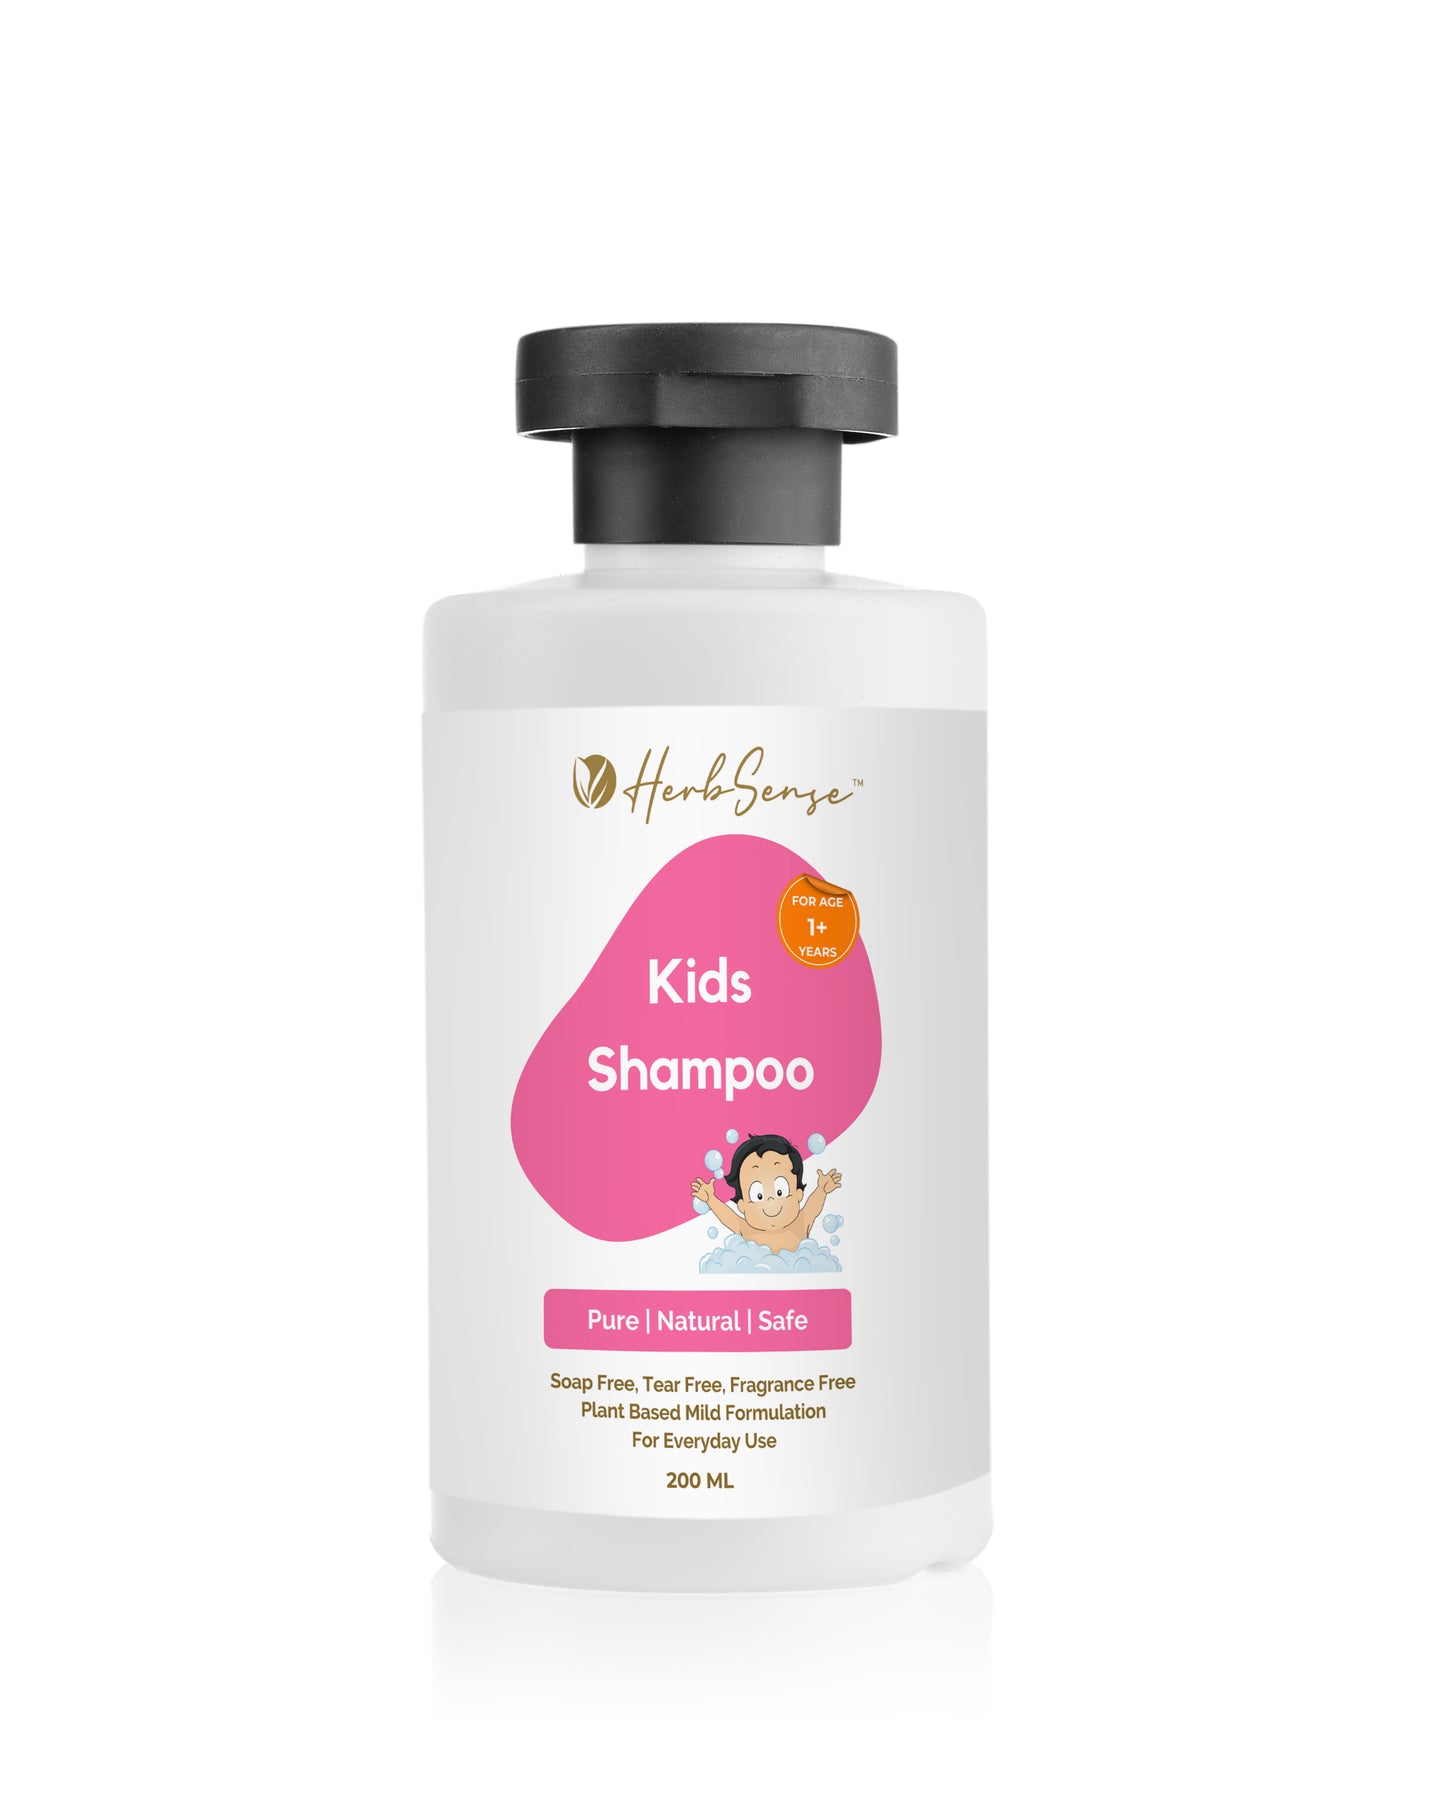 Kids Daily Shampoo & Kids Body Wash Combo Pack, Plant Based, Pure Natural & Safe, Tear Free, Zero Added Fragrance & Color (Pack of 2, 200ml x 2) For Age 1-3 Years